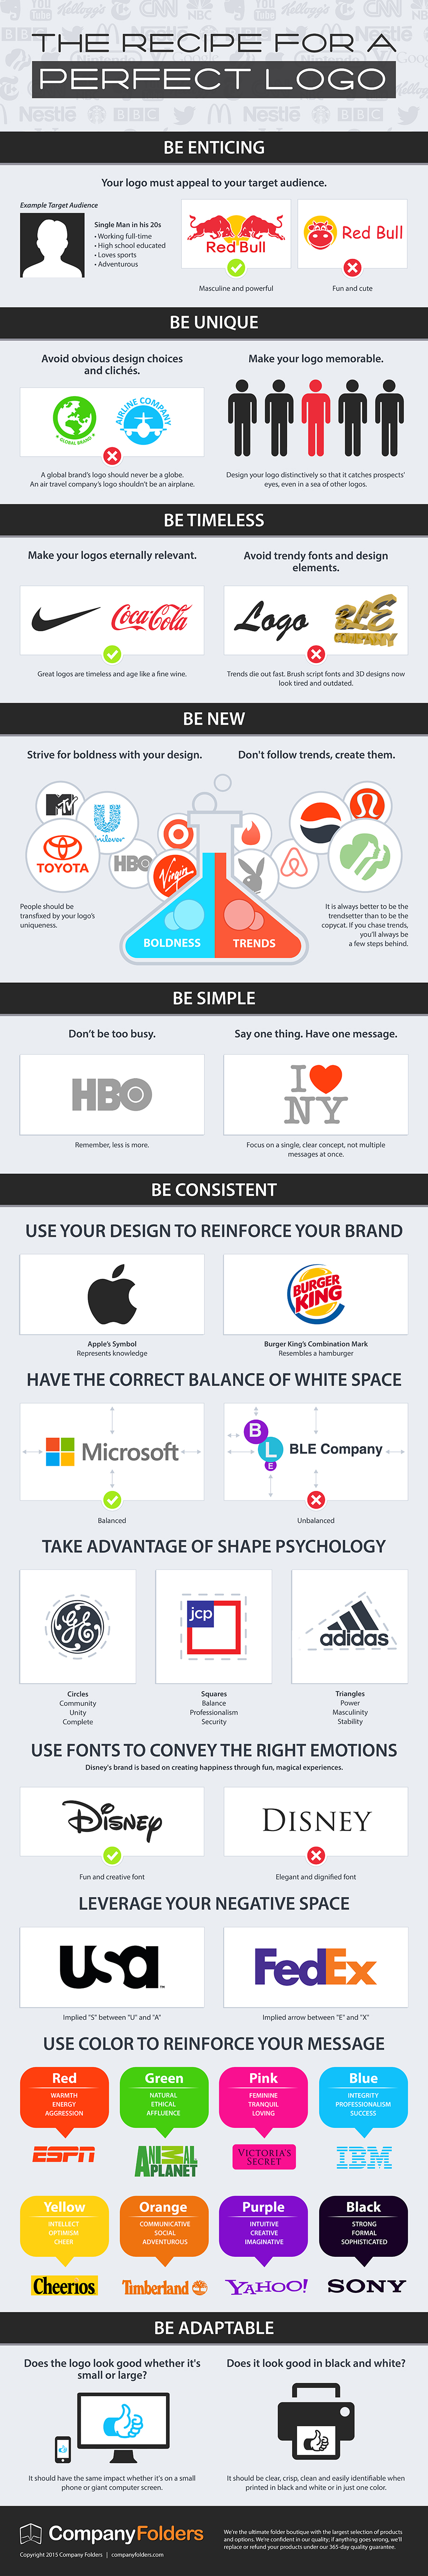 How To Design The Perfect Business Logo Infographic